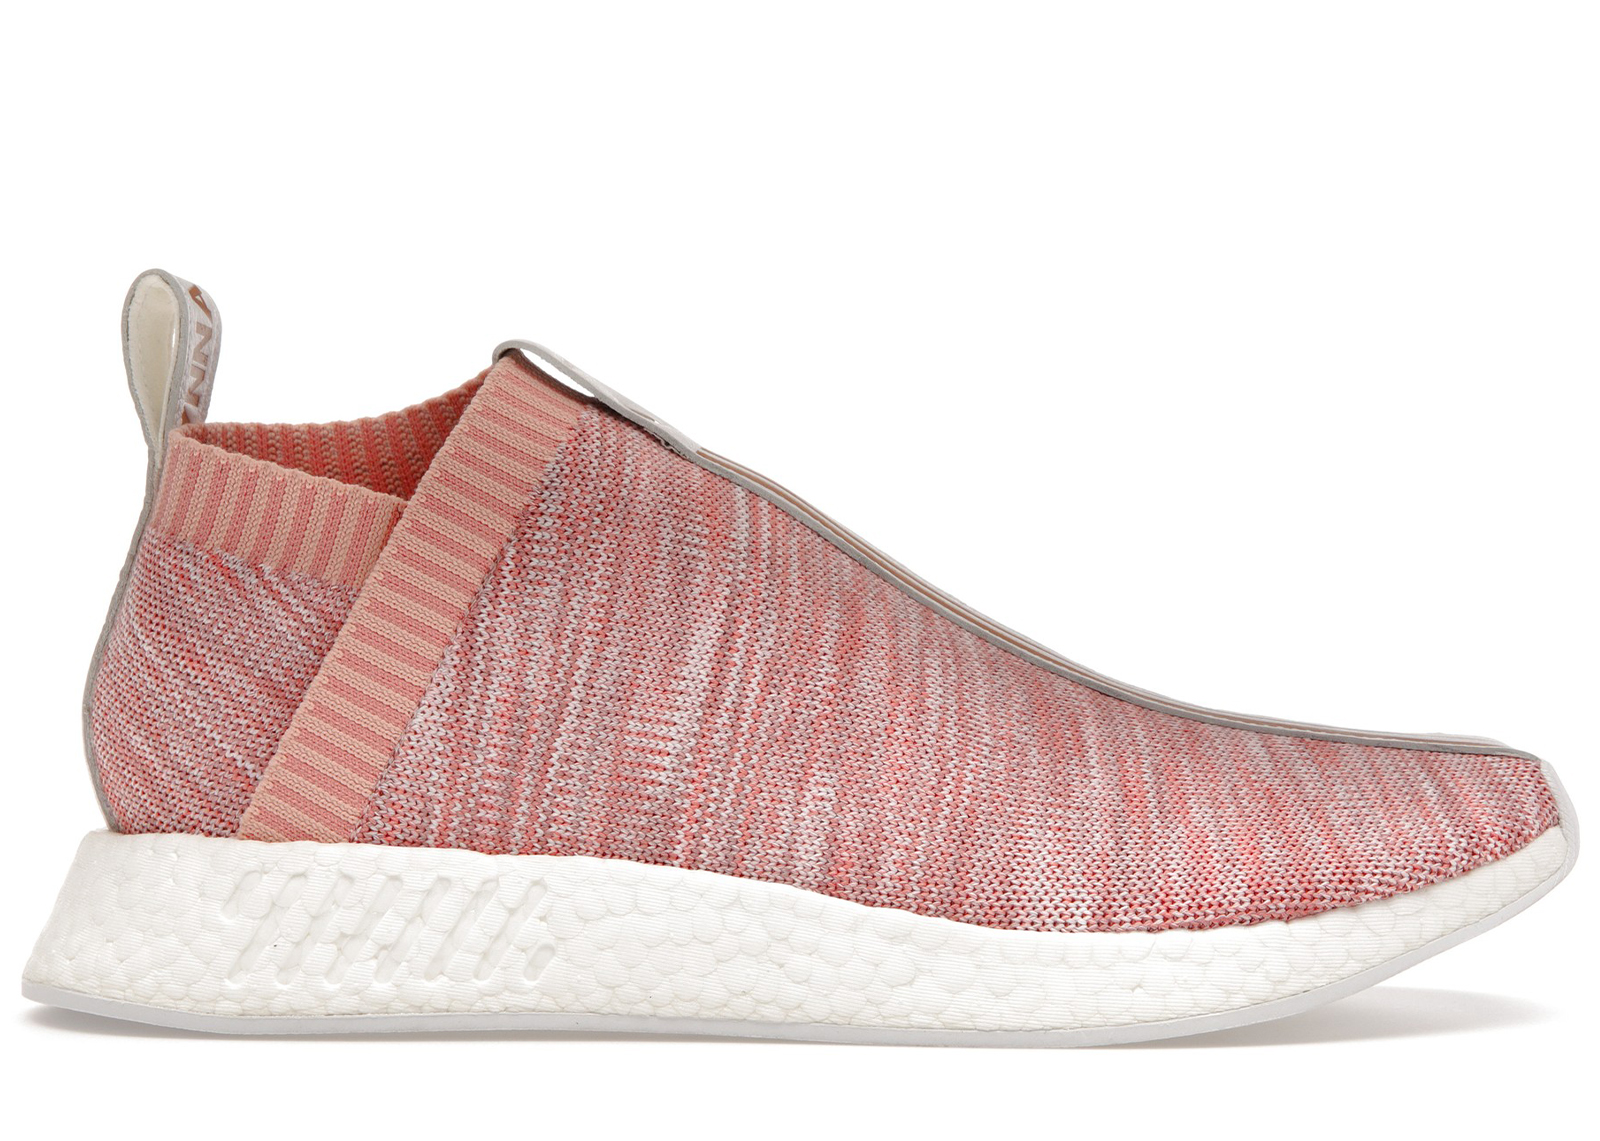 adidas NMD CS2 Kith X Naked Pink Men's - BY2596 - US